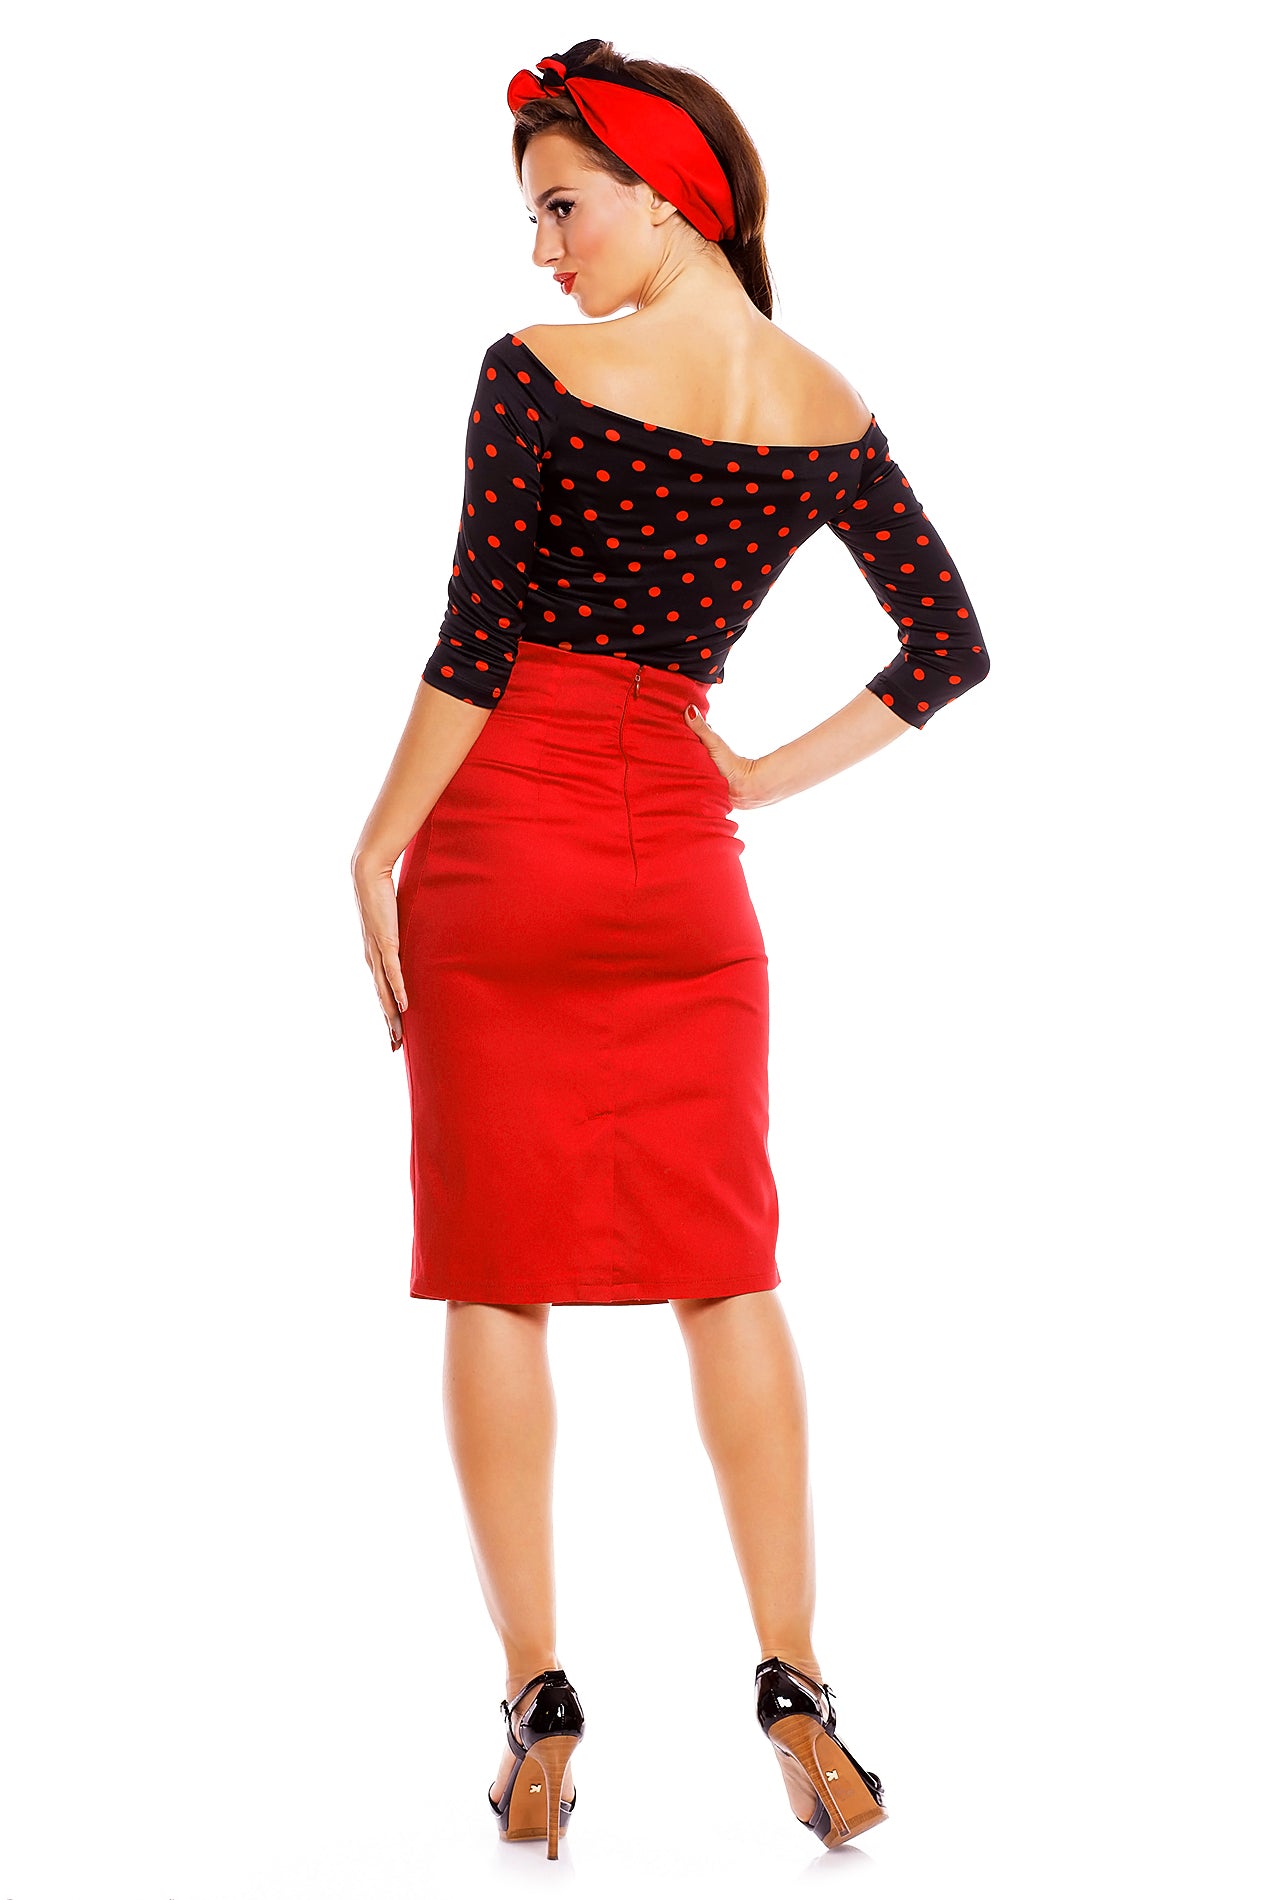 Model wearing our Gloria Rockabilly Top in Black/Red Polka Dots, with red skirt and headband, back view